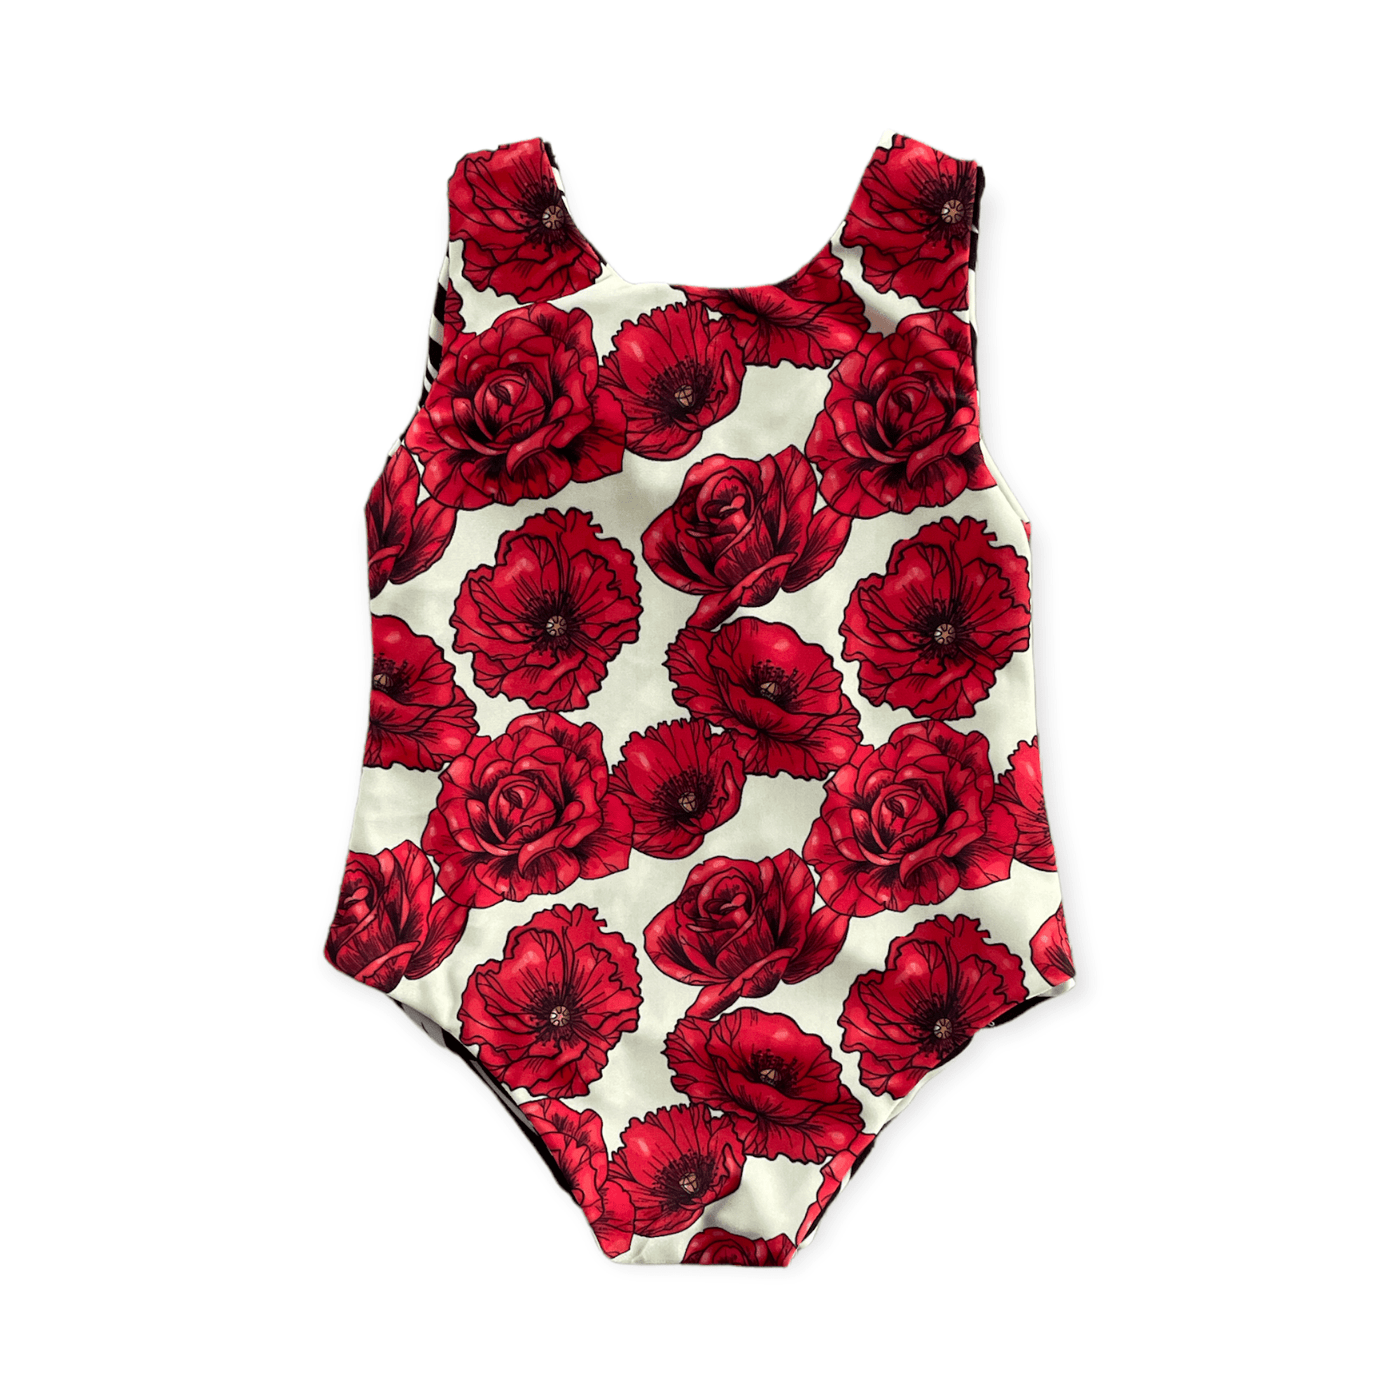 Best Day Ever Kids Swimsuit Perfectly Poppy Swimsuit buy online boutique kids clothing